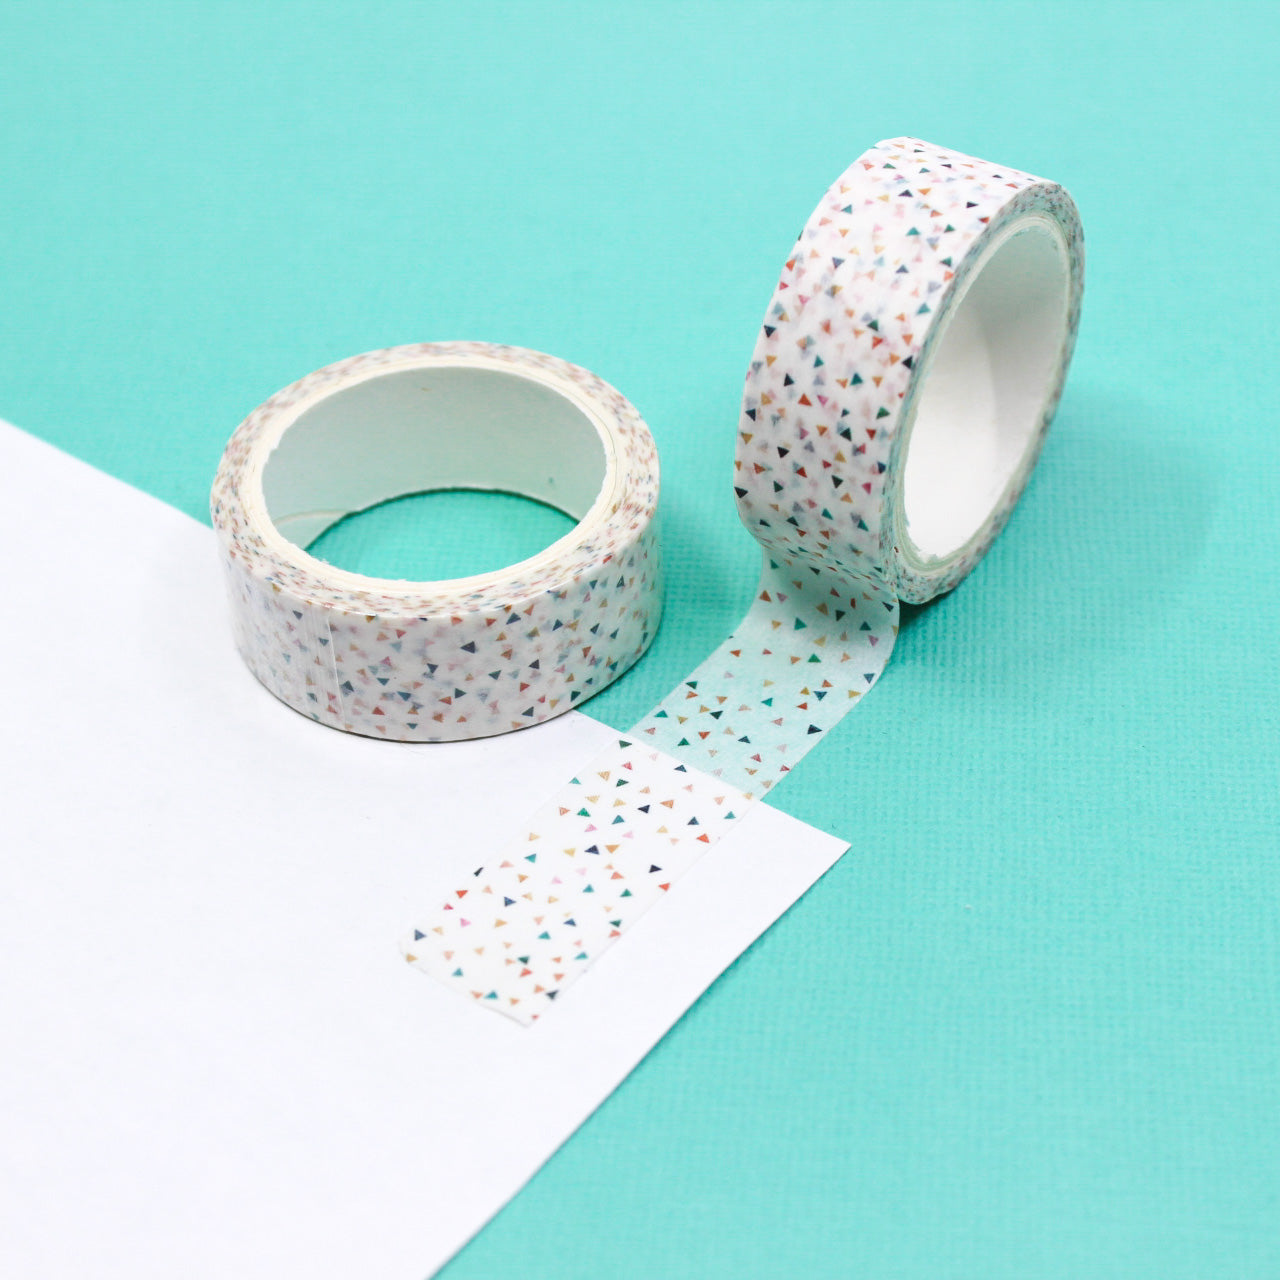 A lively washi tape adorned with colorful triangle confetti patterns, ideal for bringing a playful touch to your planners, scrapbooks, and creative projects. This tape is sold at BBB Supplies Craft Shop!